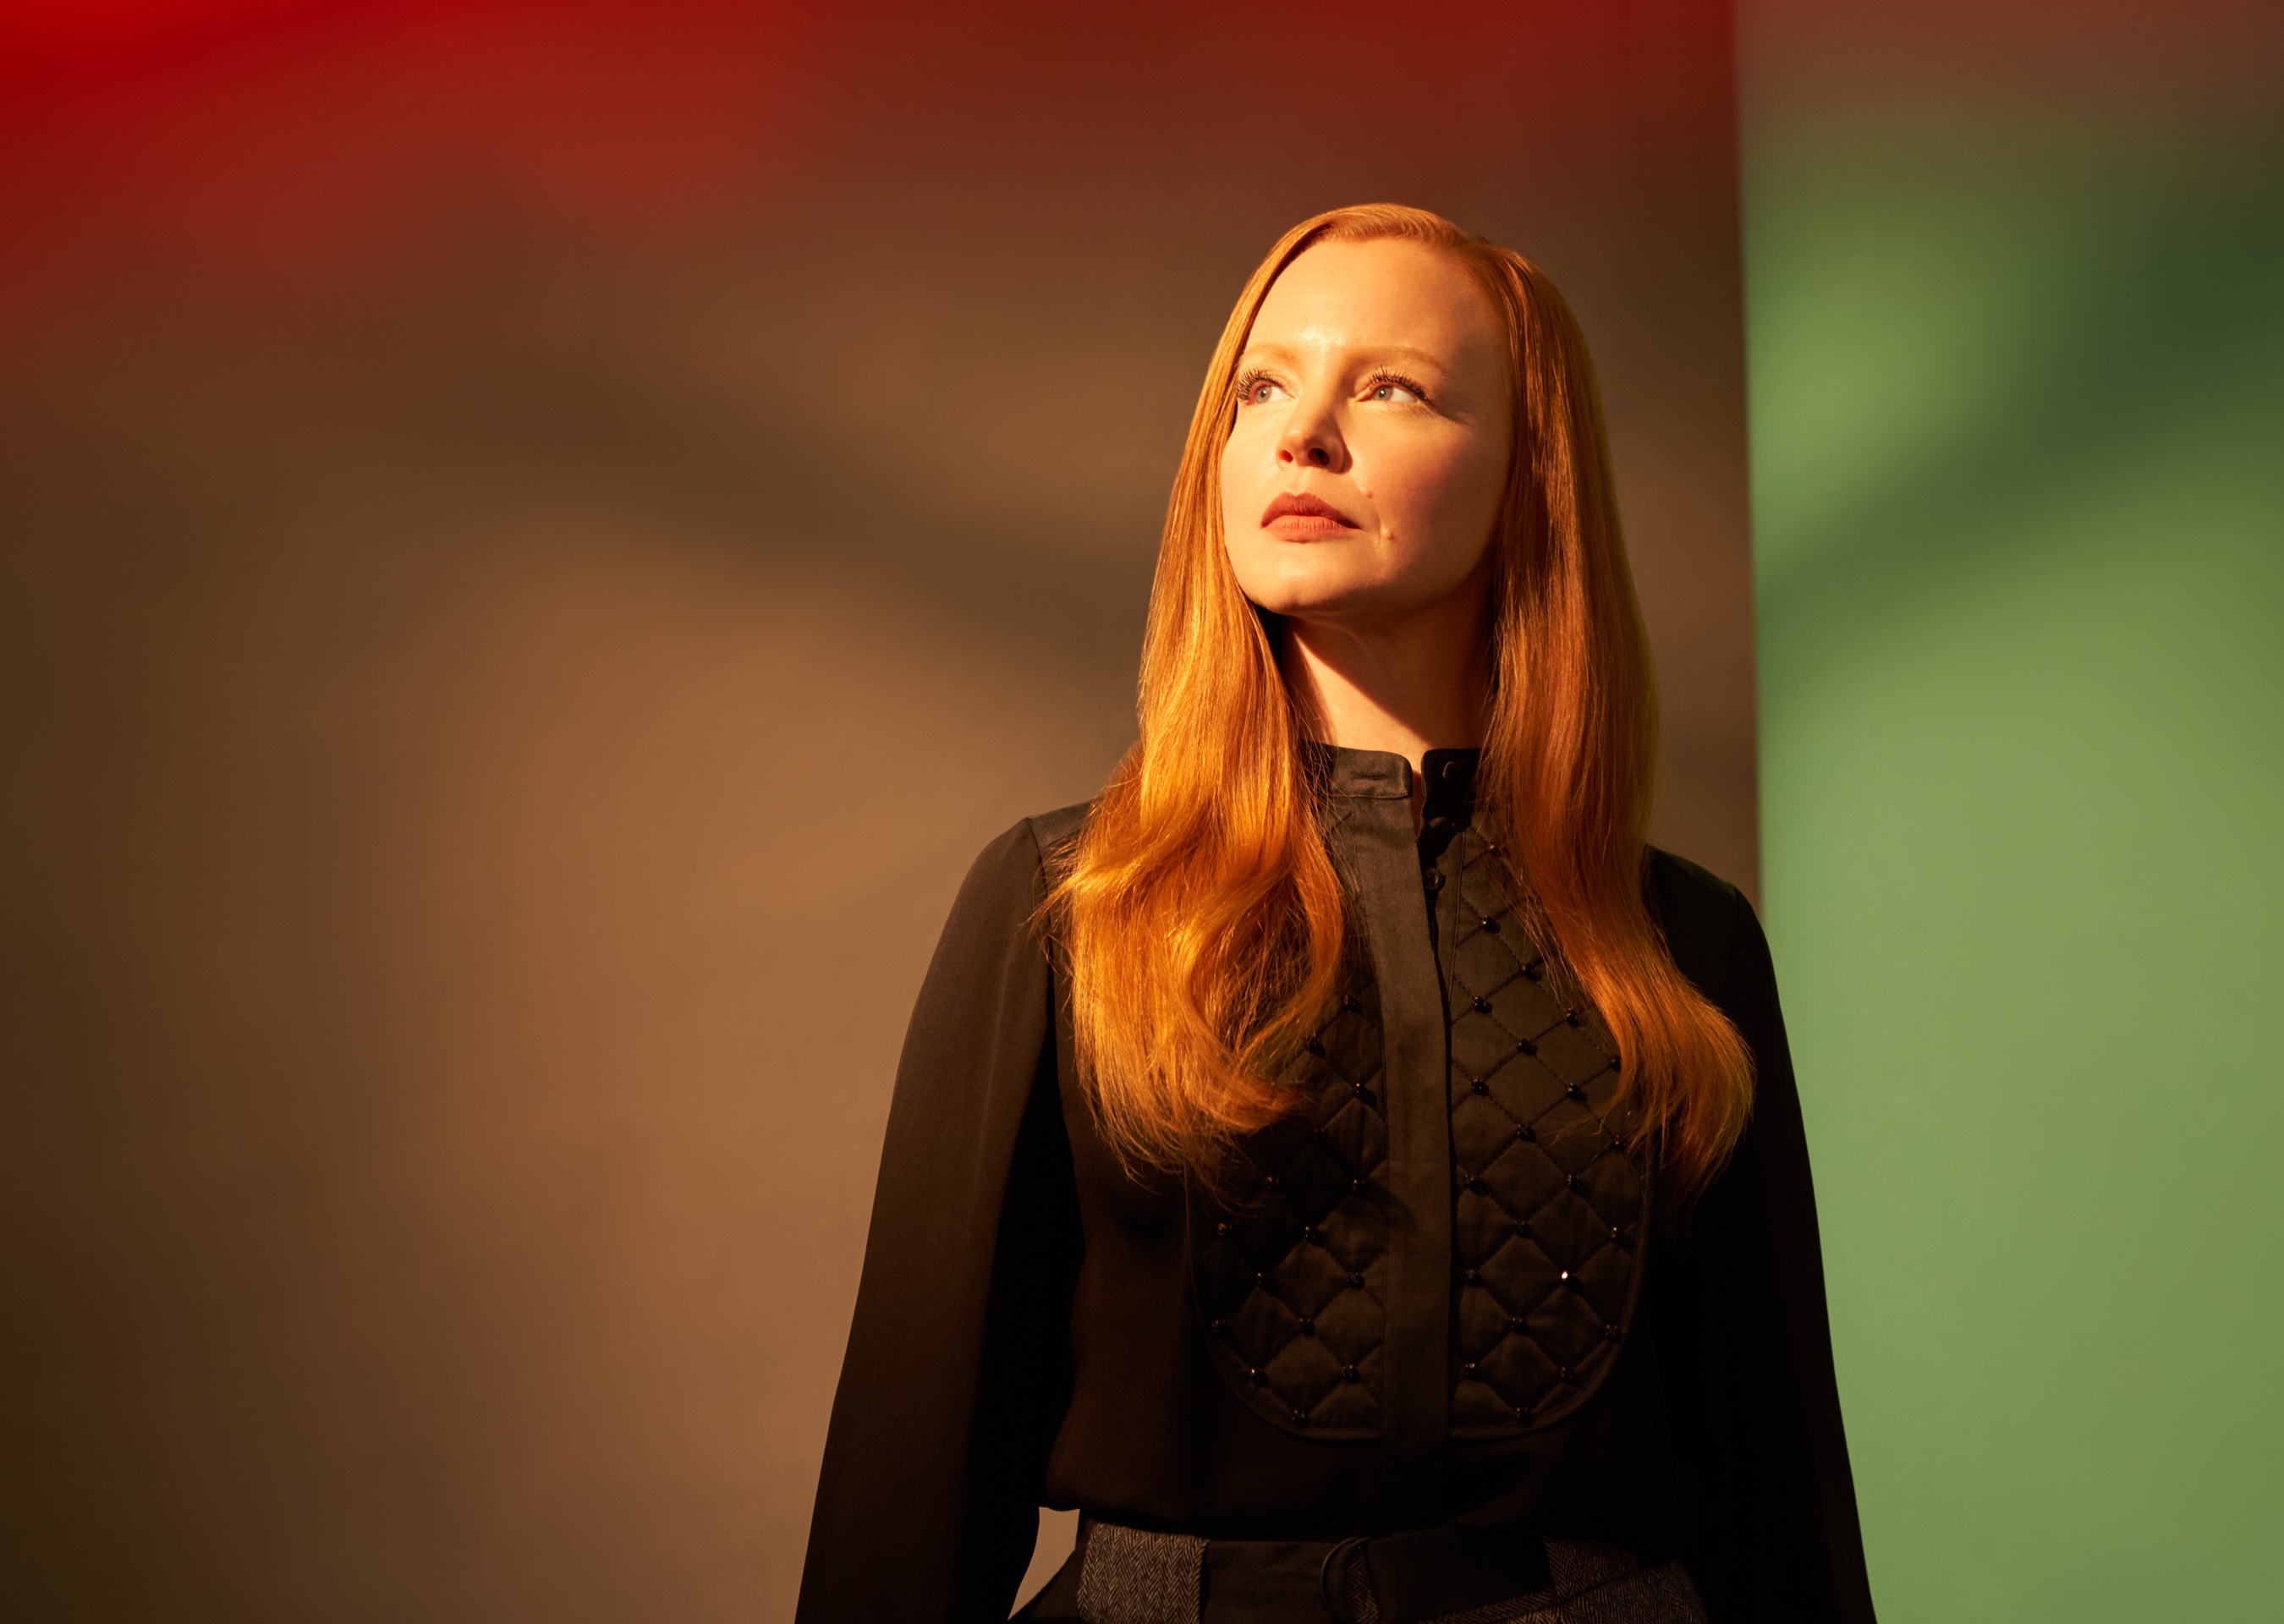 Lauren Ambrose on the Thrilling, ‘Holy’ Process of Bringing a Character to Life